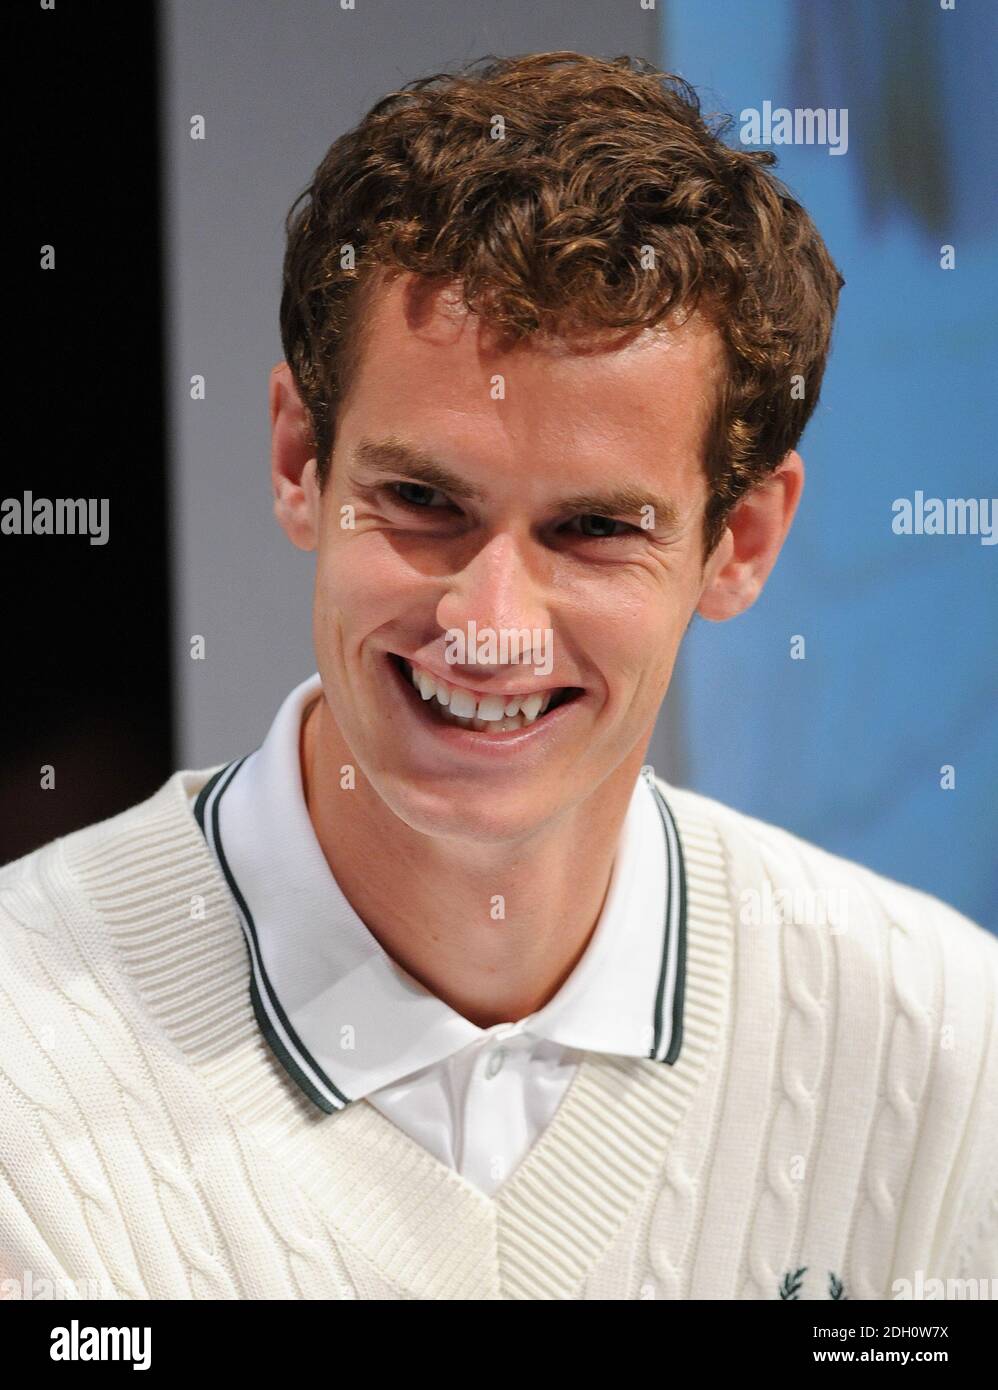 World number three tennis player Andy Murray joins fashion label Fred Perry  to reveal bespoke new kit, at the Tramshed, London Stock Photo - Alamy